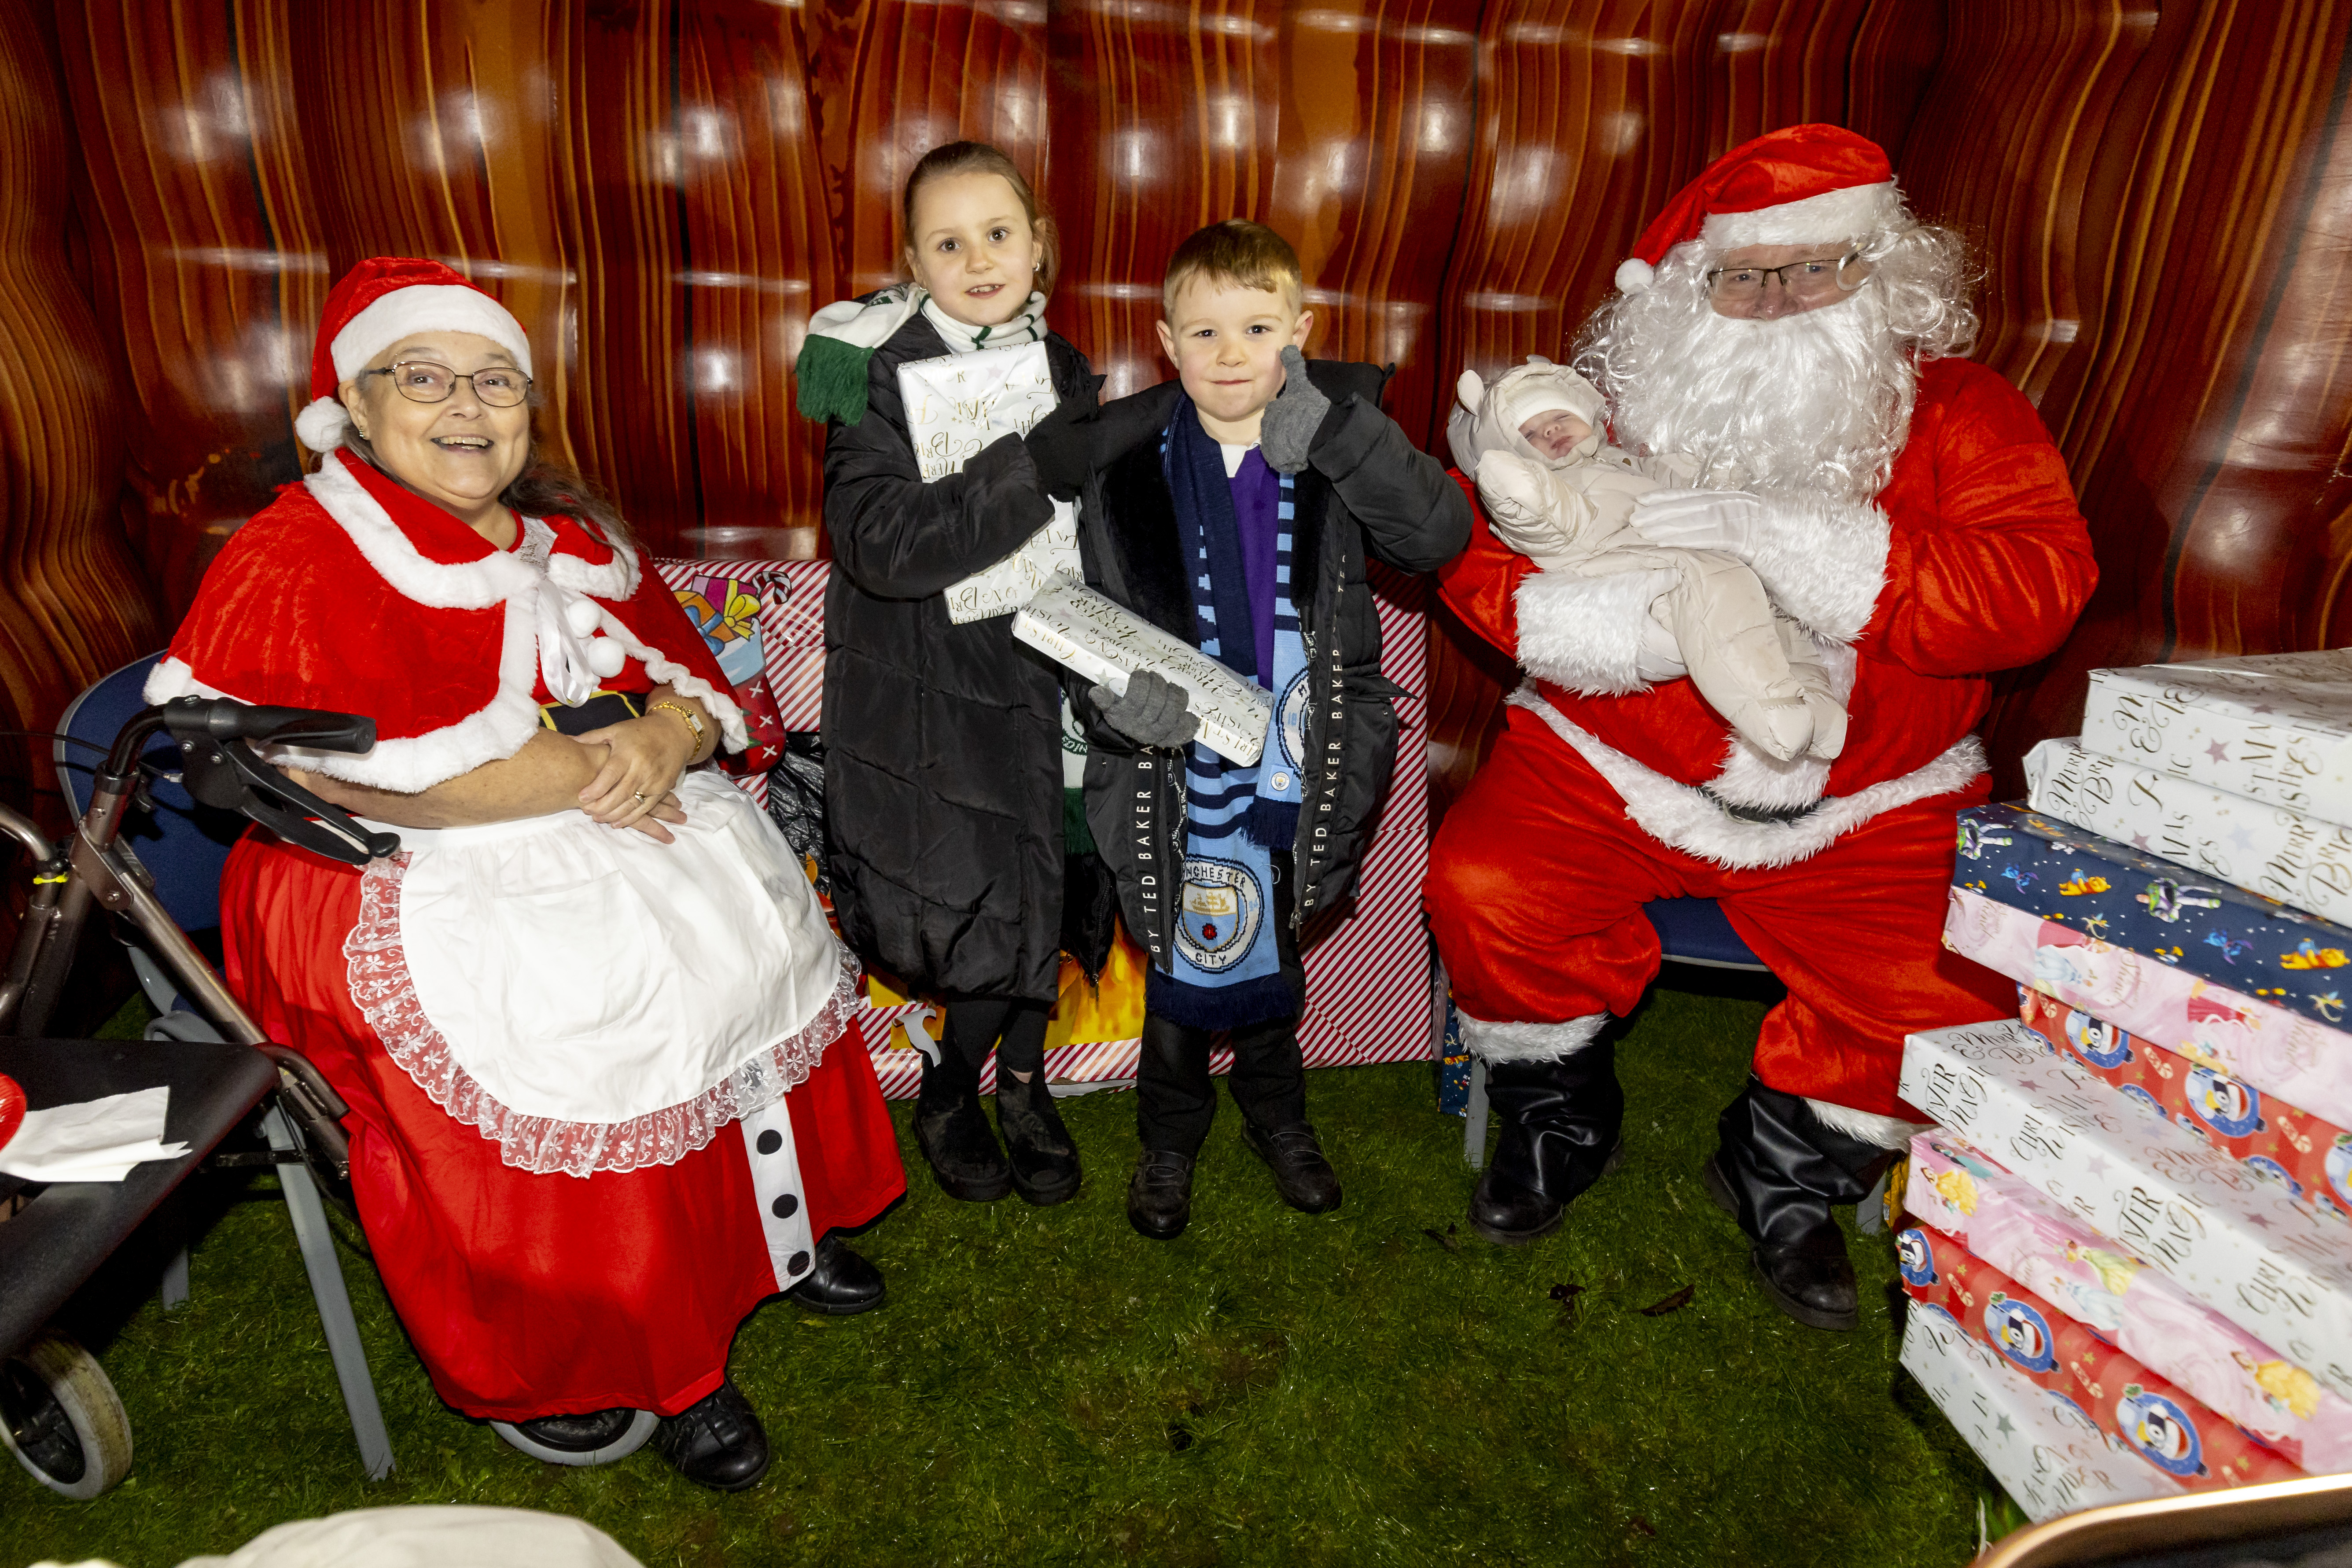 Santa visits Craigmillar and Niddrie Christmas light switch-on to spread community cheer